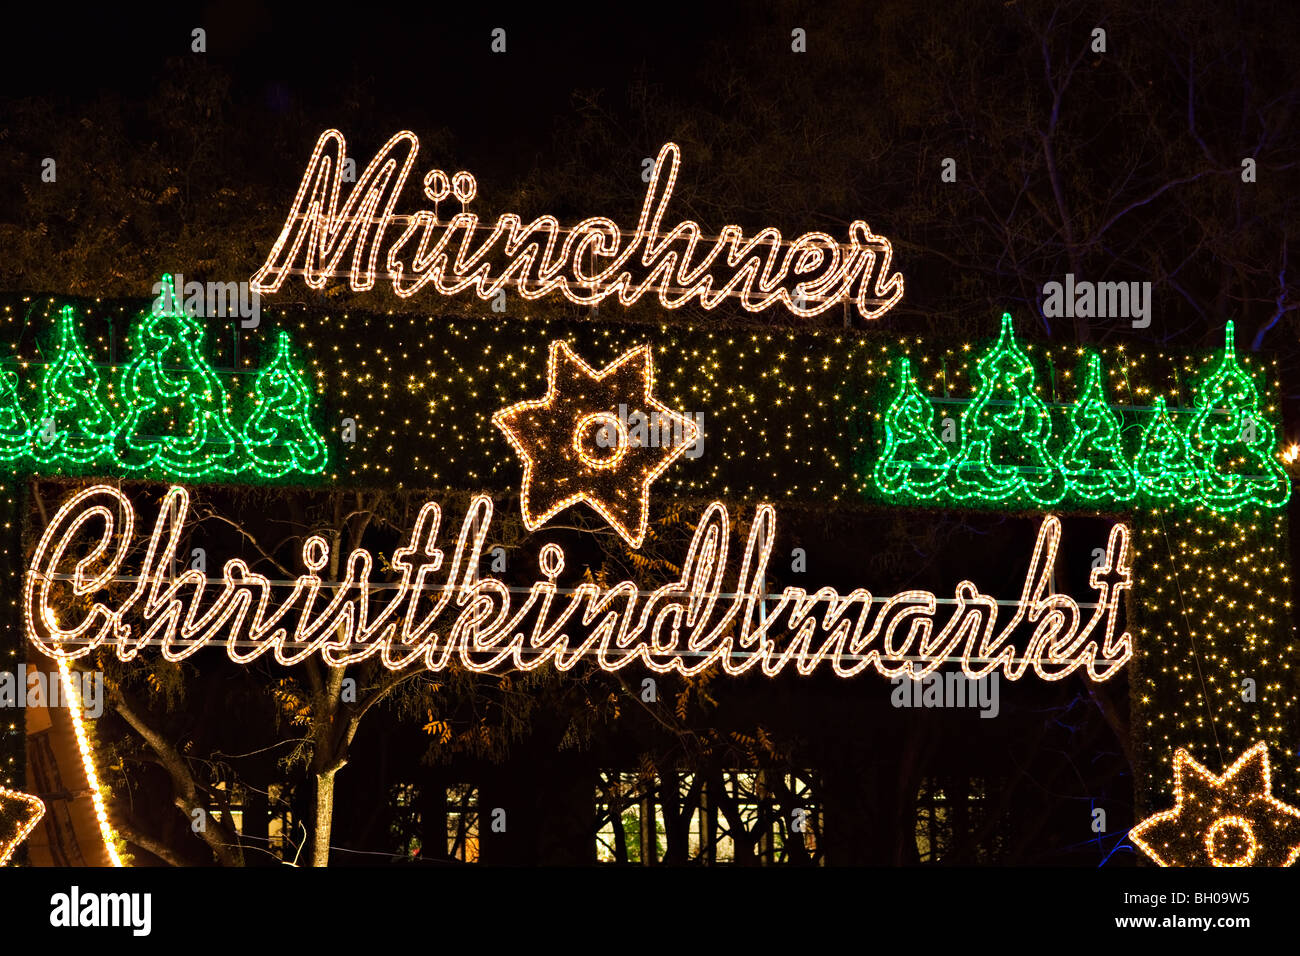 Illuminated bright sign for the München Christkindlmarkt (Christmas Markets) in the City of München (Munich), Bavaria, Germany,  Stock Photo